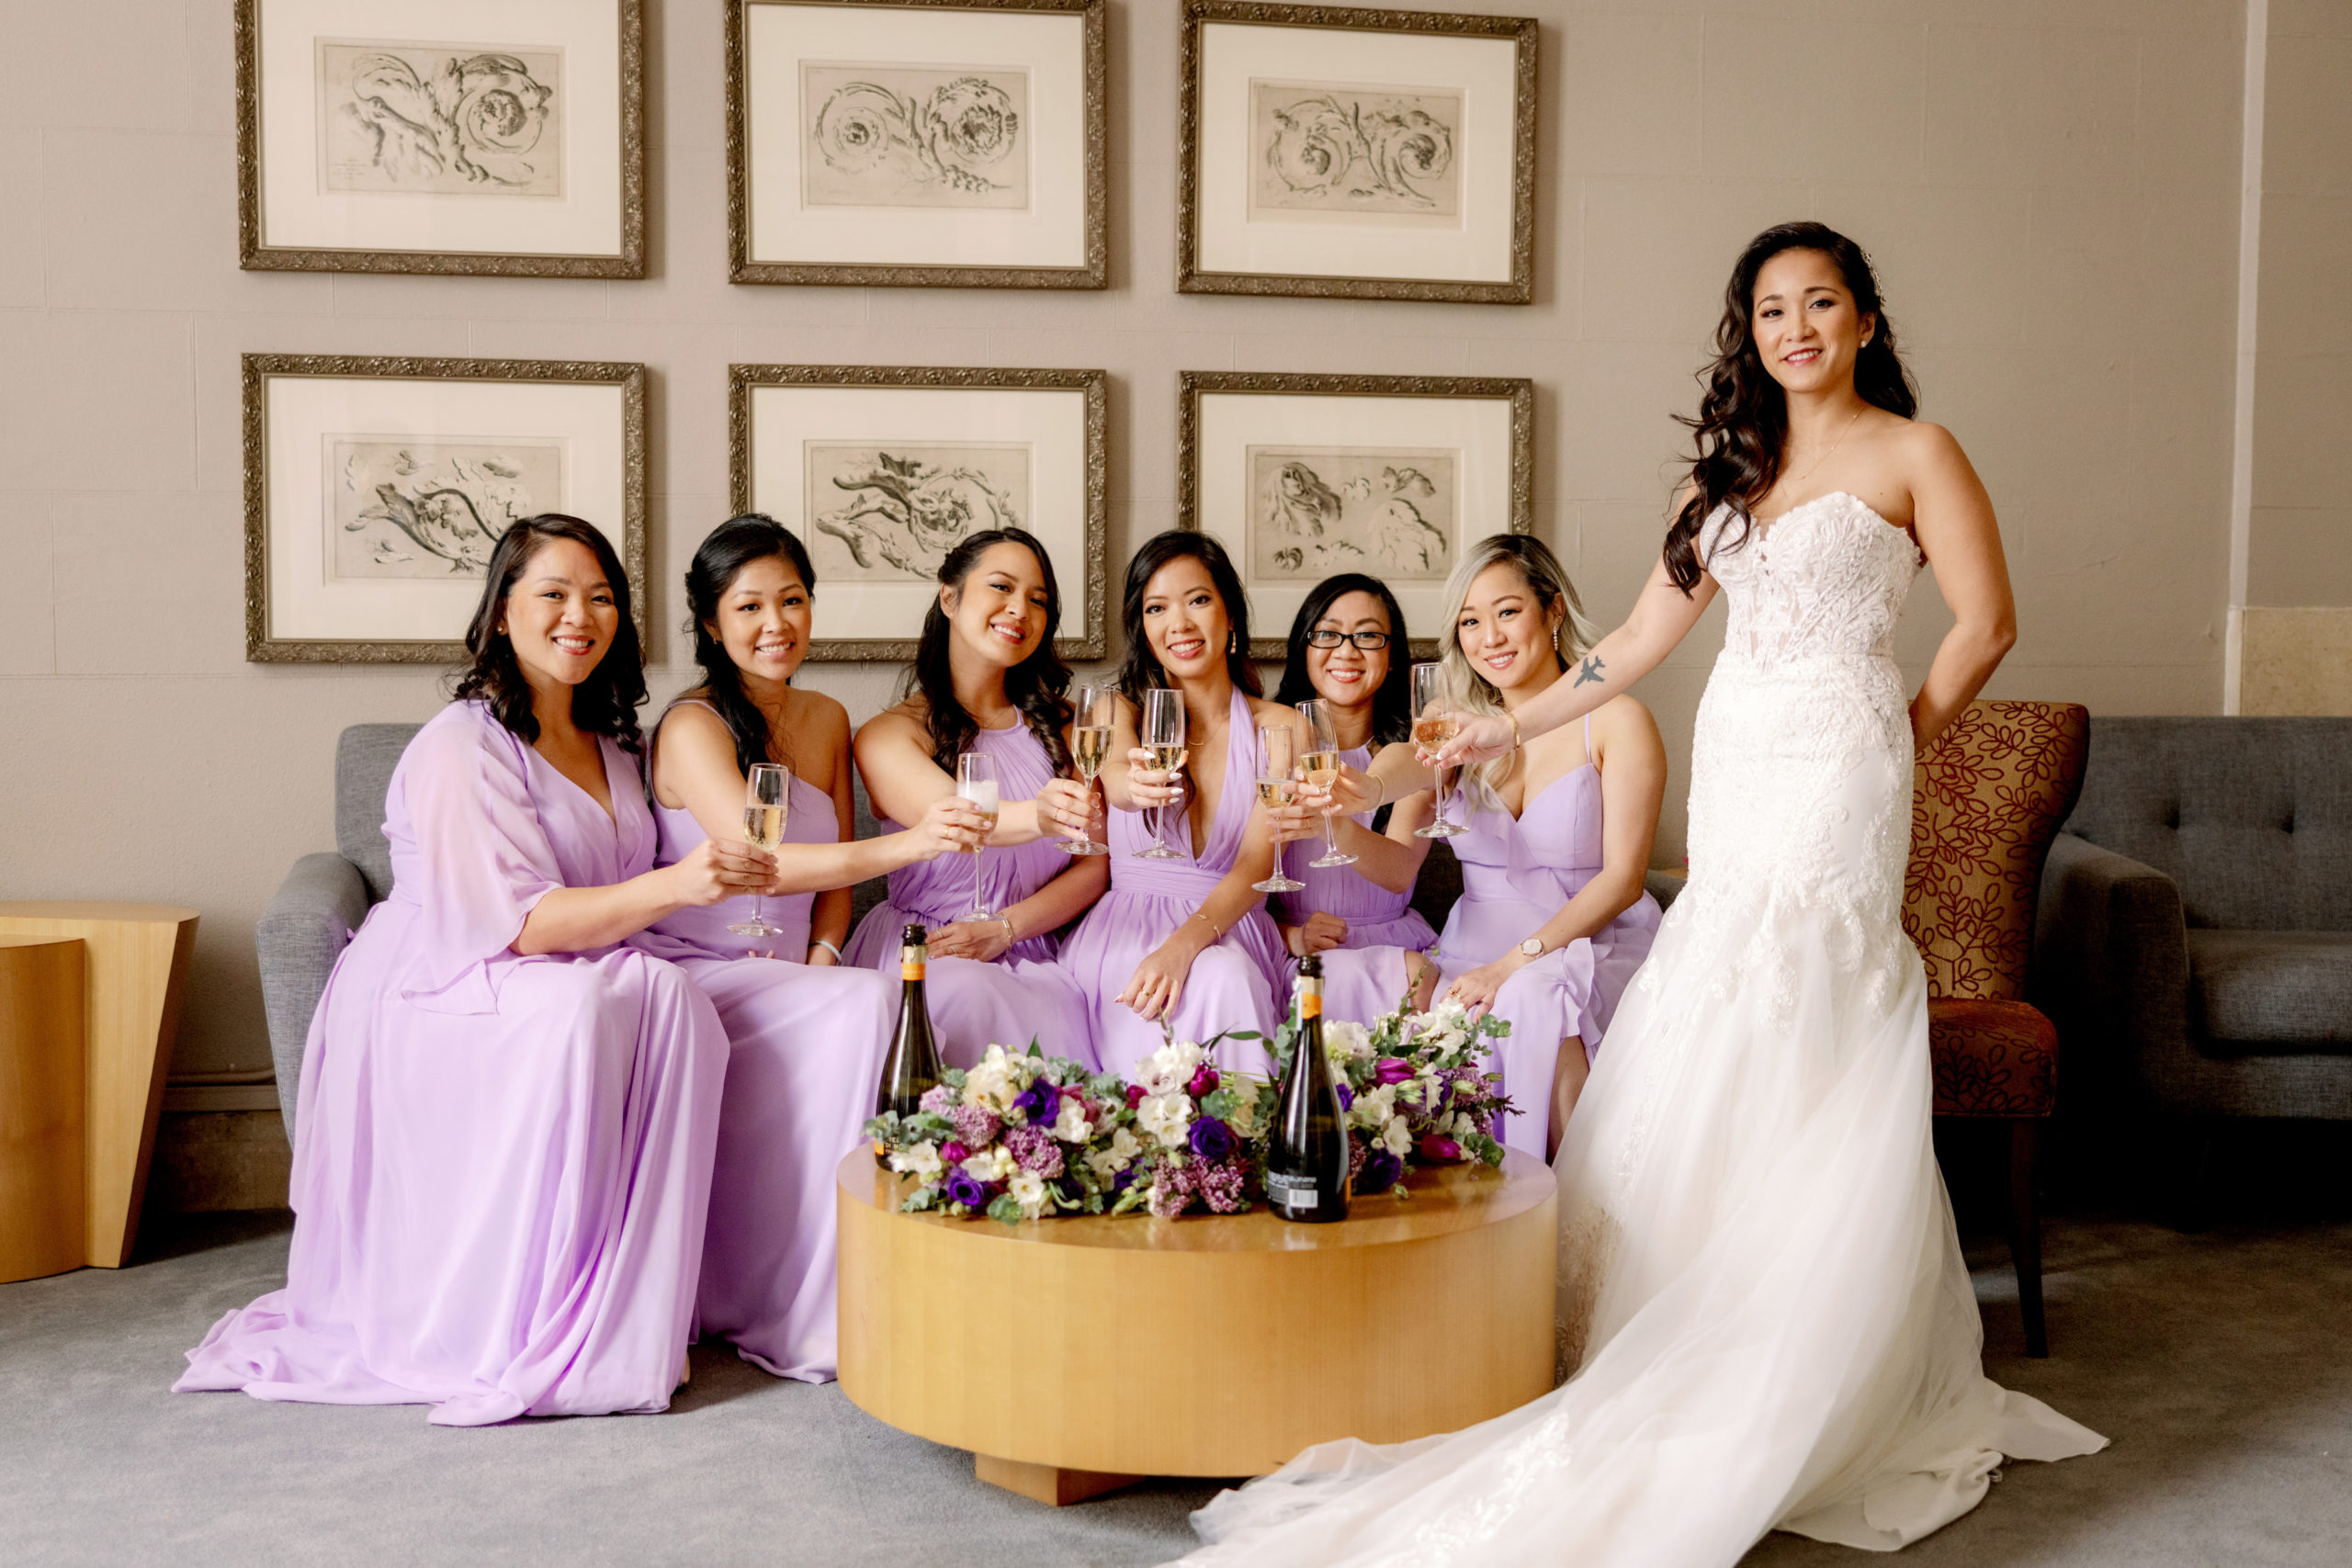 The bride and the bridesmaids are holding champagne bottles. Luxury wedding photography image by Jenny Fu Studio.